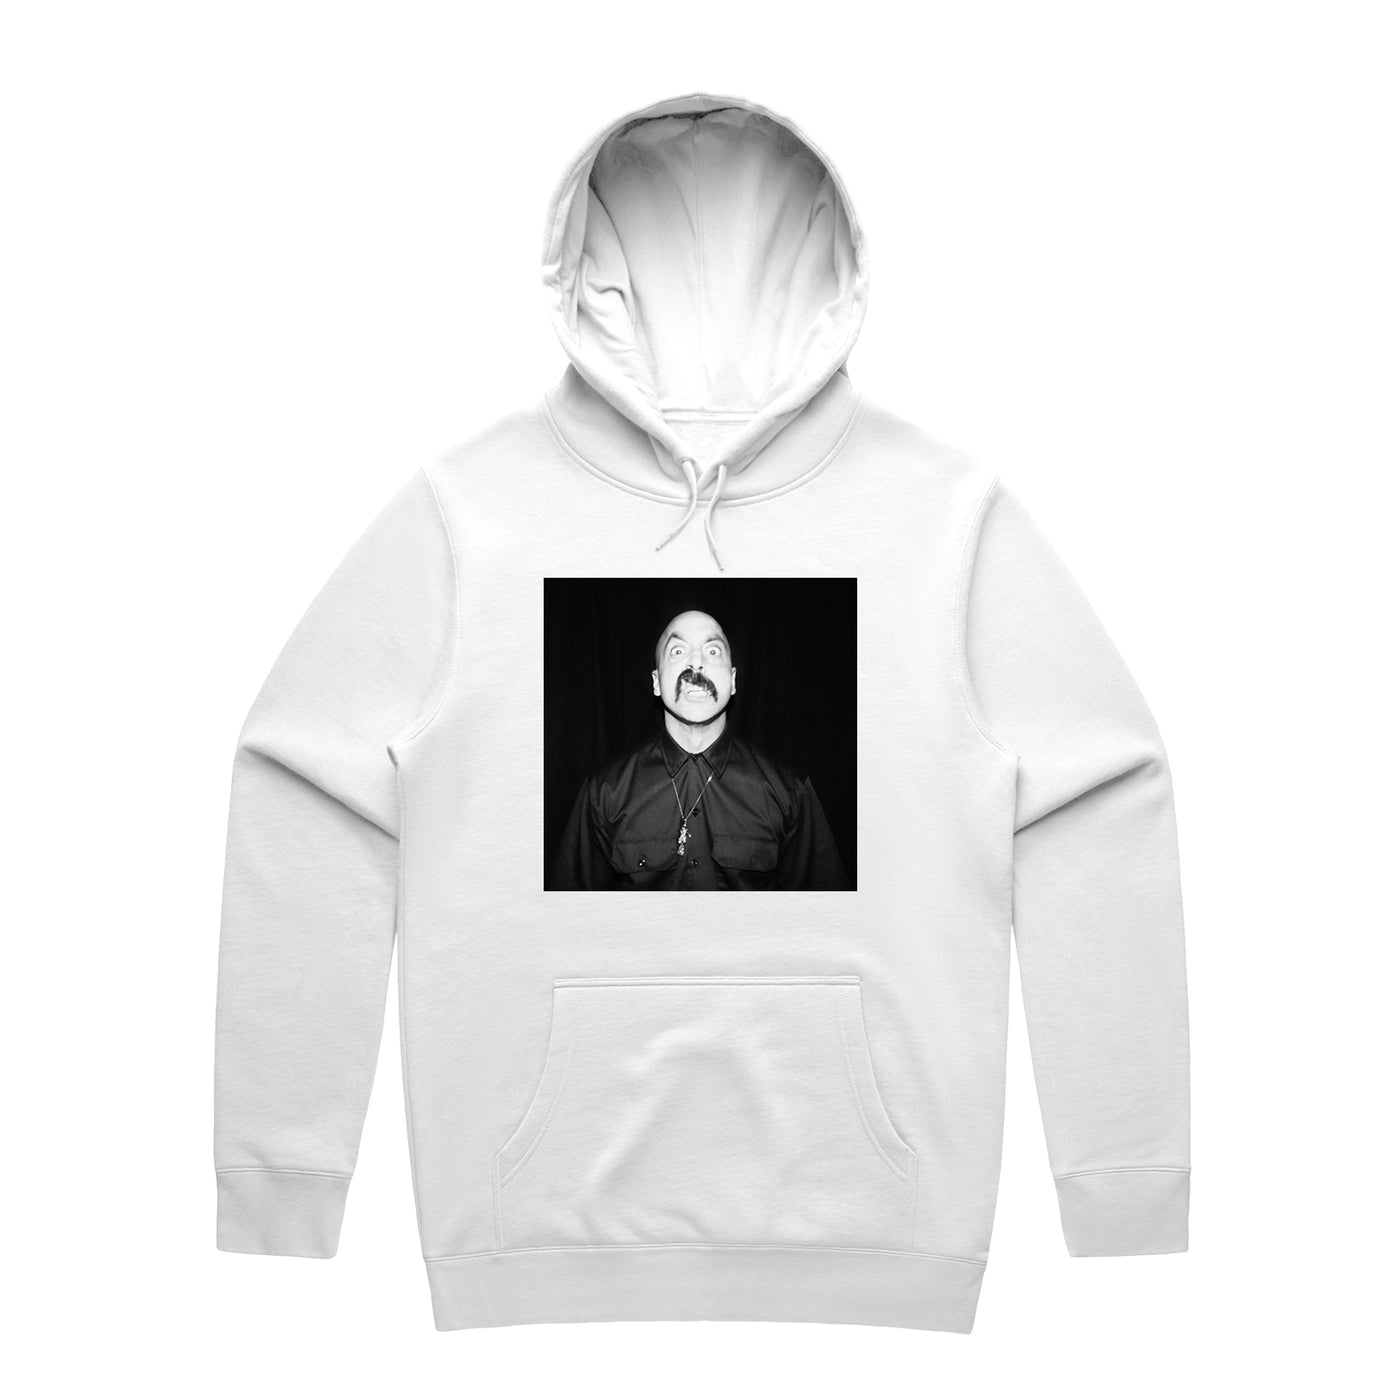 N8NOFACE - Bound to Let You Down (The Remixes) White Hoodie